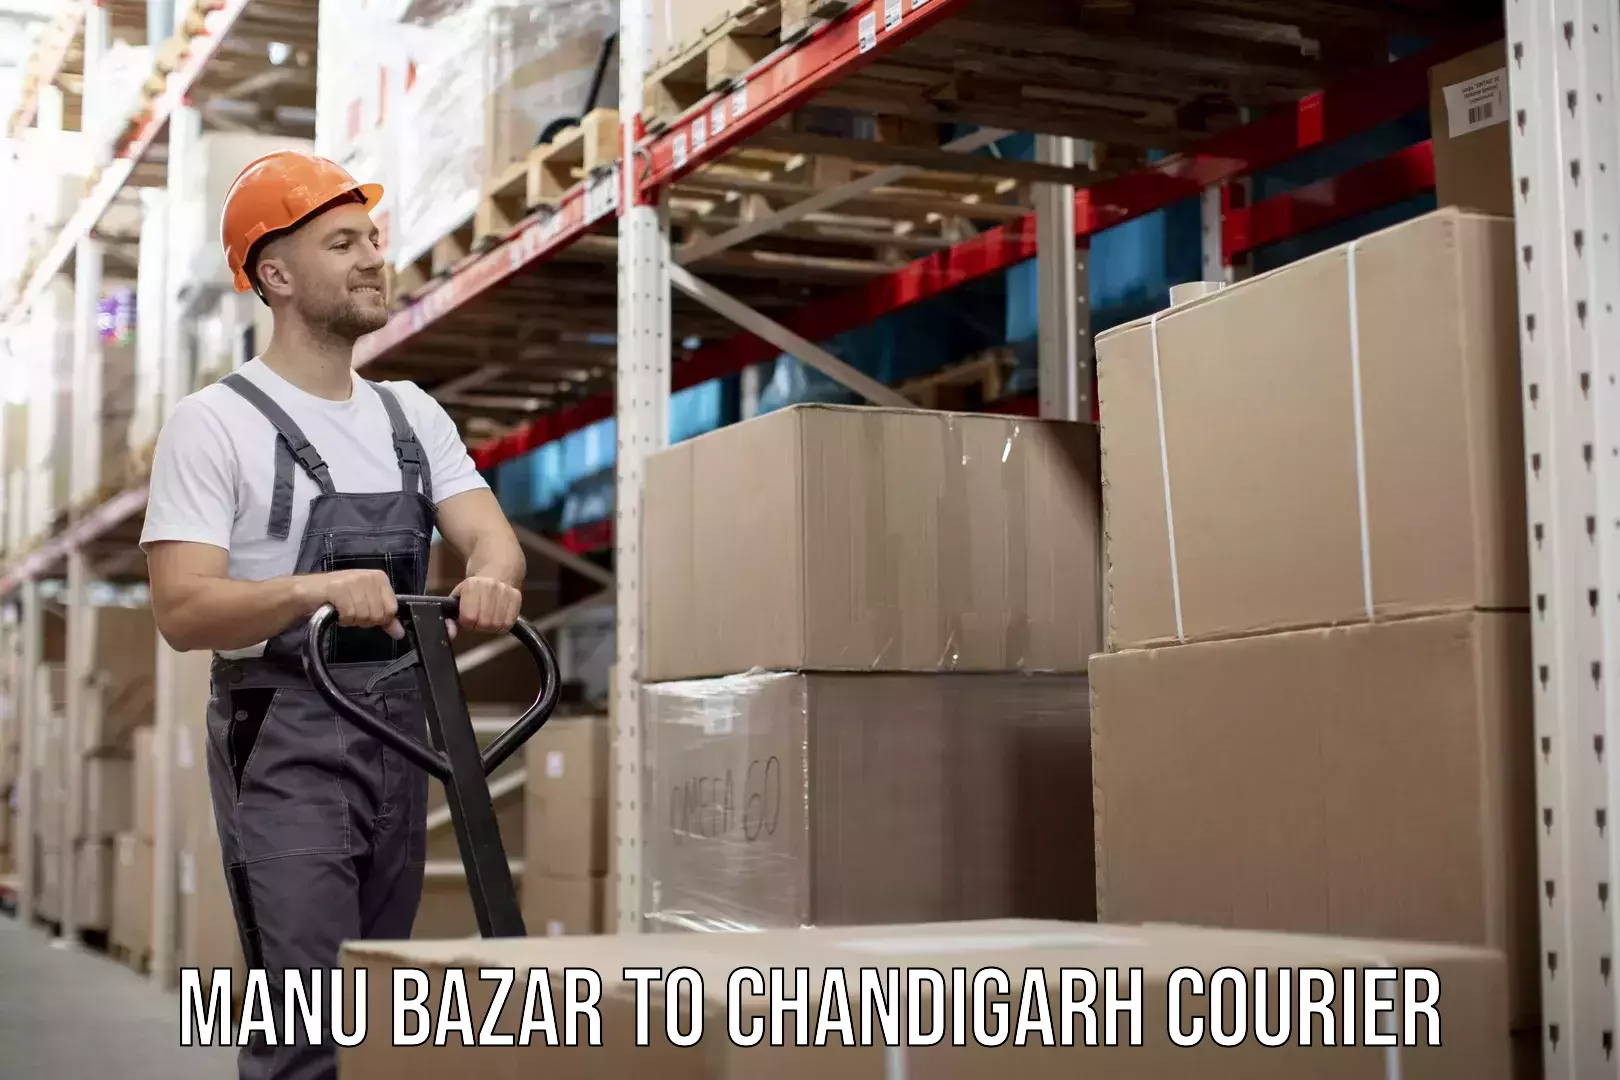 Business delivery service Manu Bazar to Chandigarh